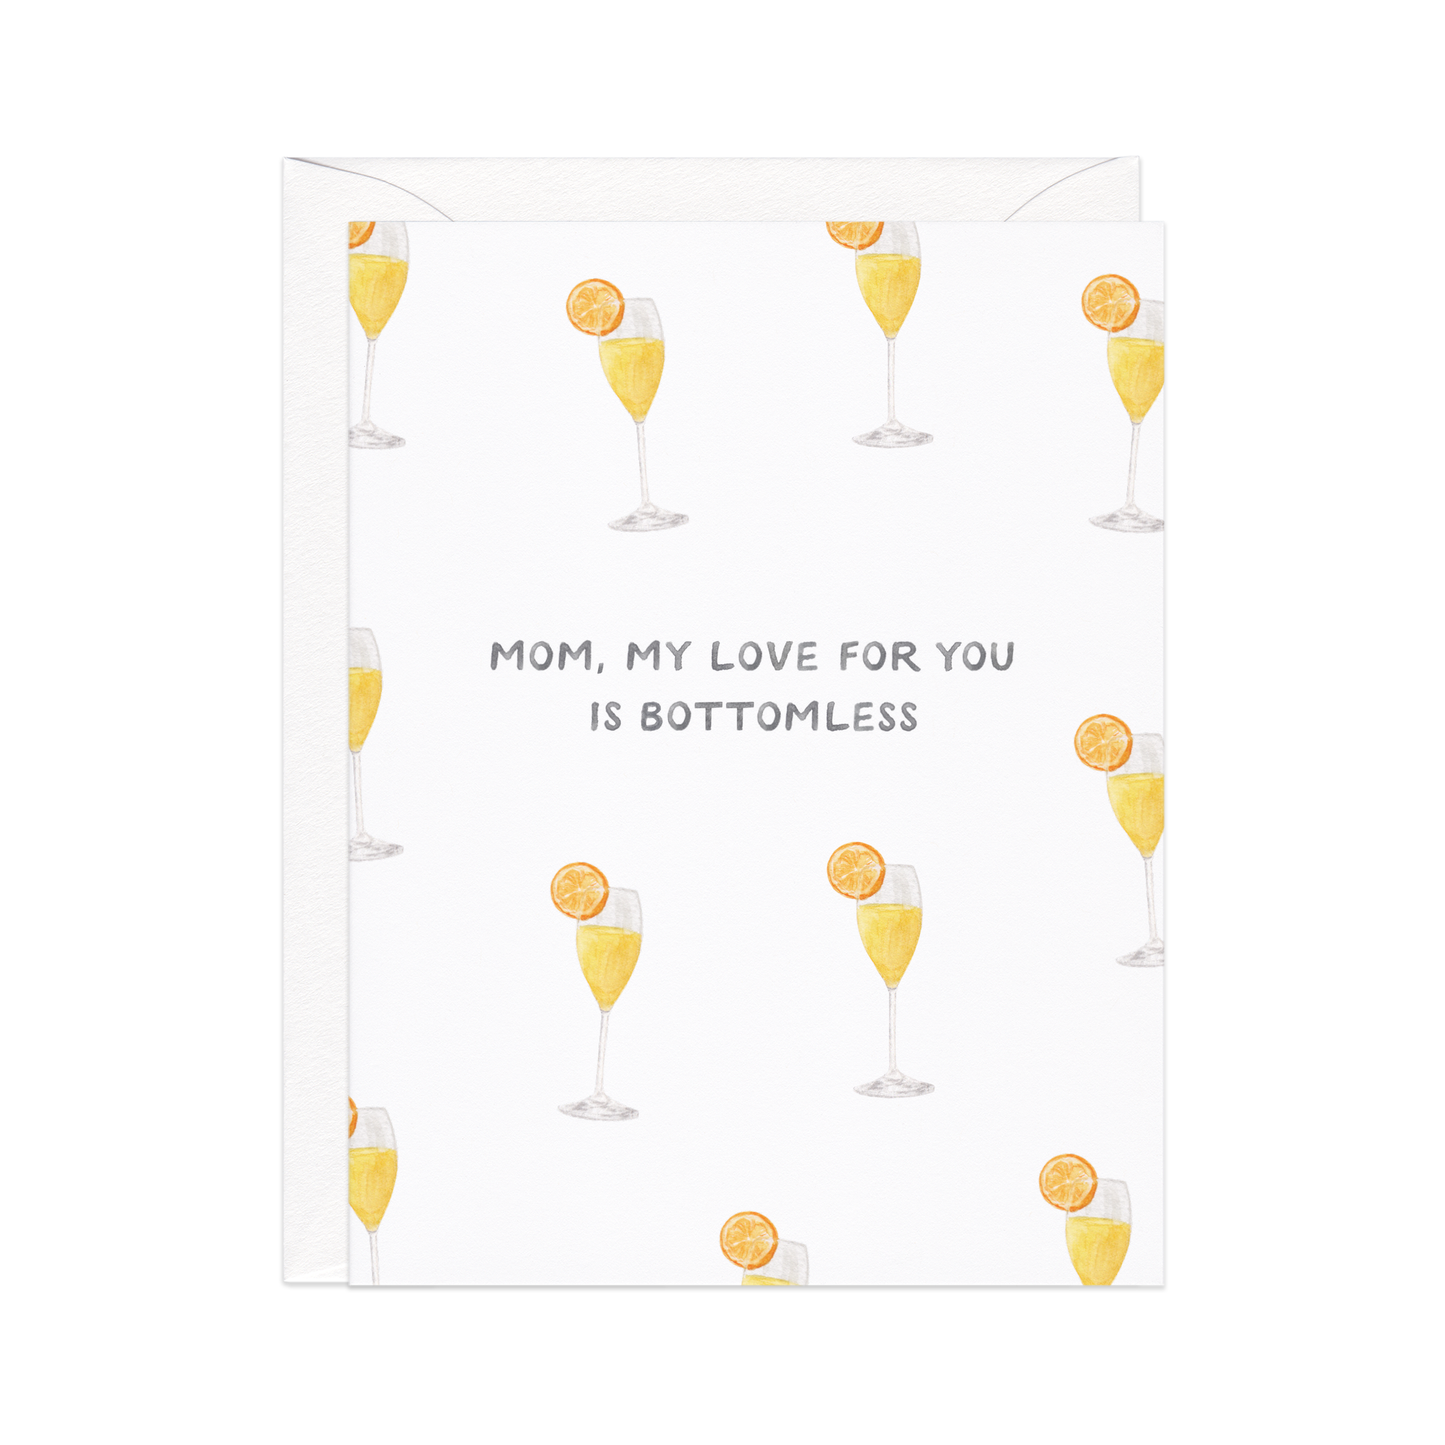 Greeting card with mimosa pattern. The card says "mom, my love for you is bottomless."